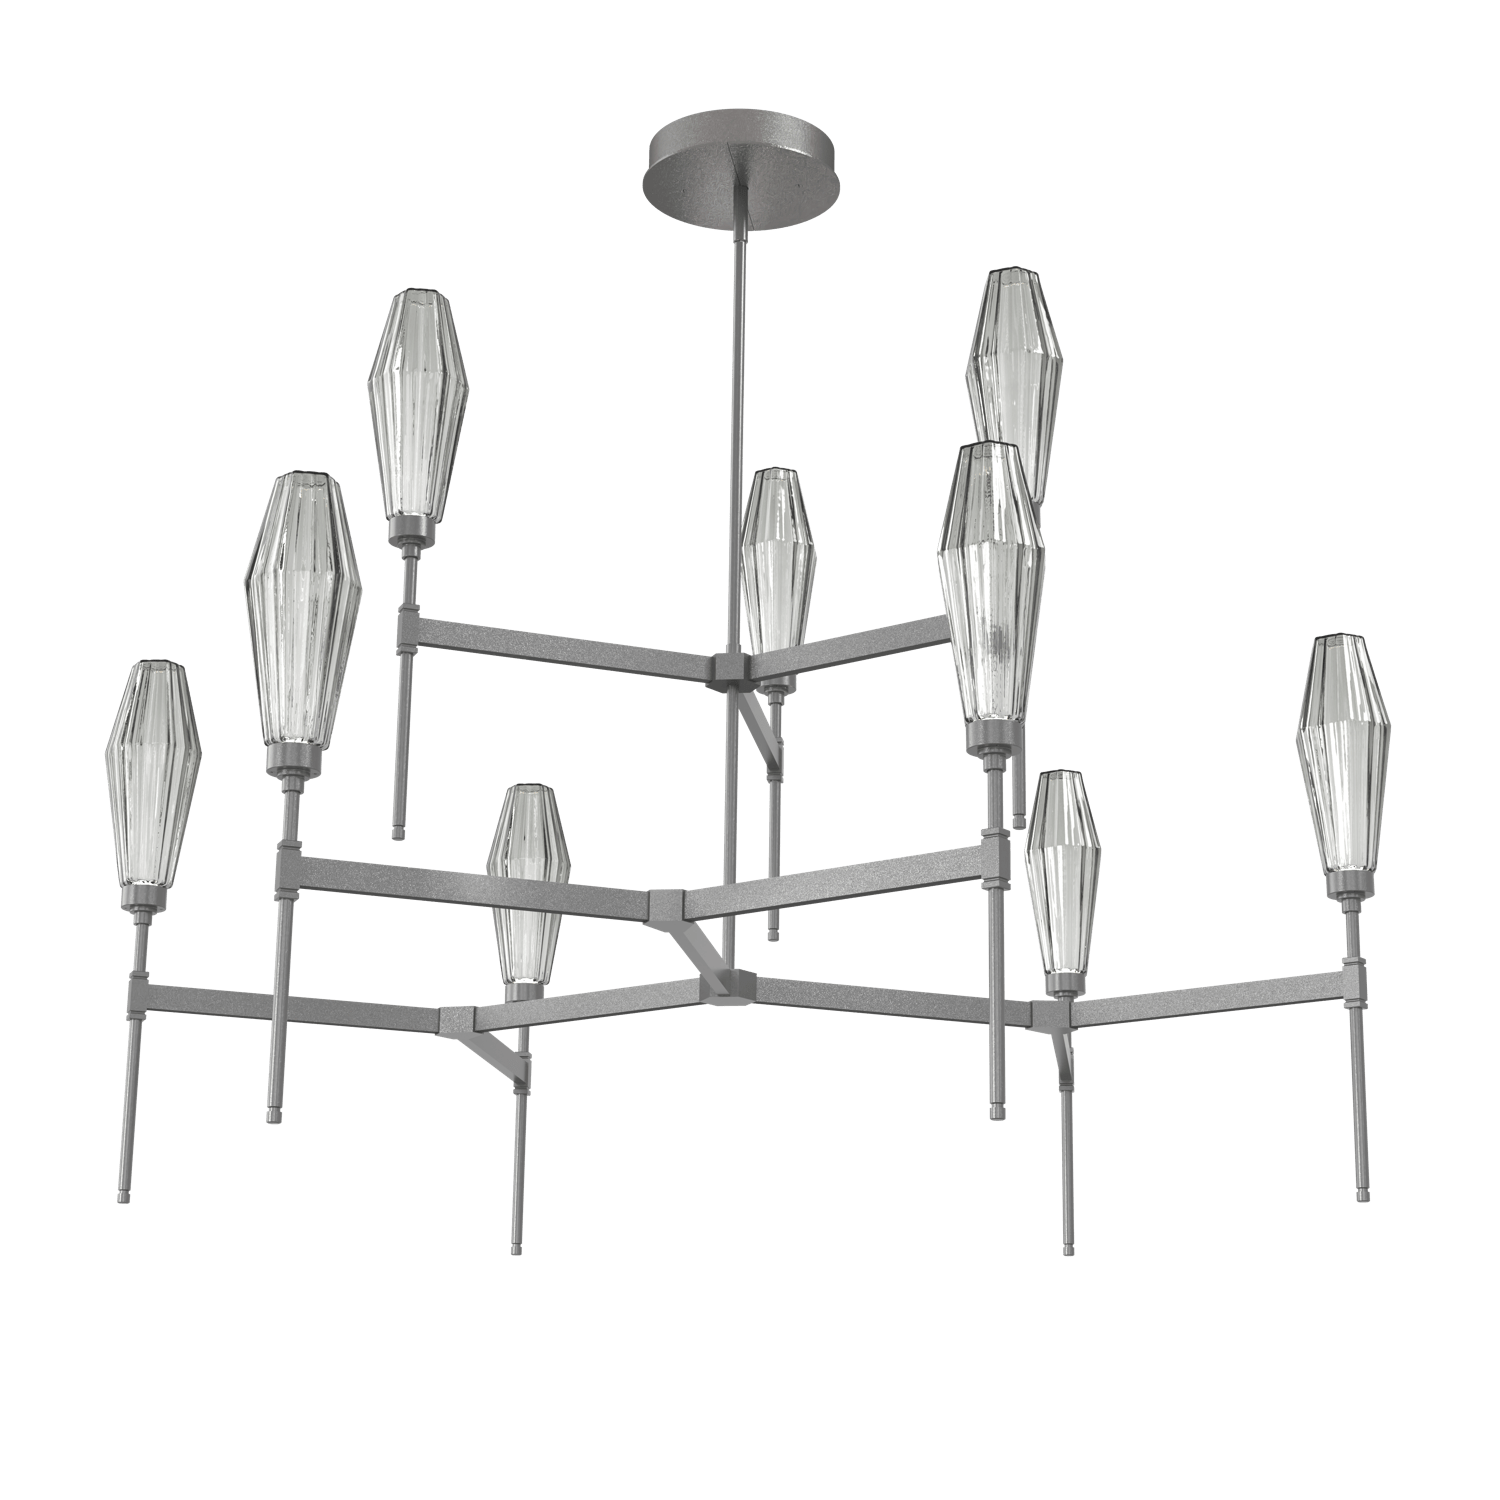 CHB0049-54-GP-RS-Hammerton-Studio-Aalto-54-inch-round-two-tier-belvedere-chandelier-with-graphite-finish-and-optic-ribbed-smoke-glass-shades-and-LED-lamping